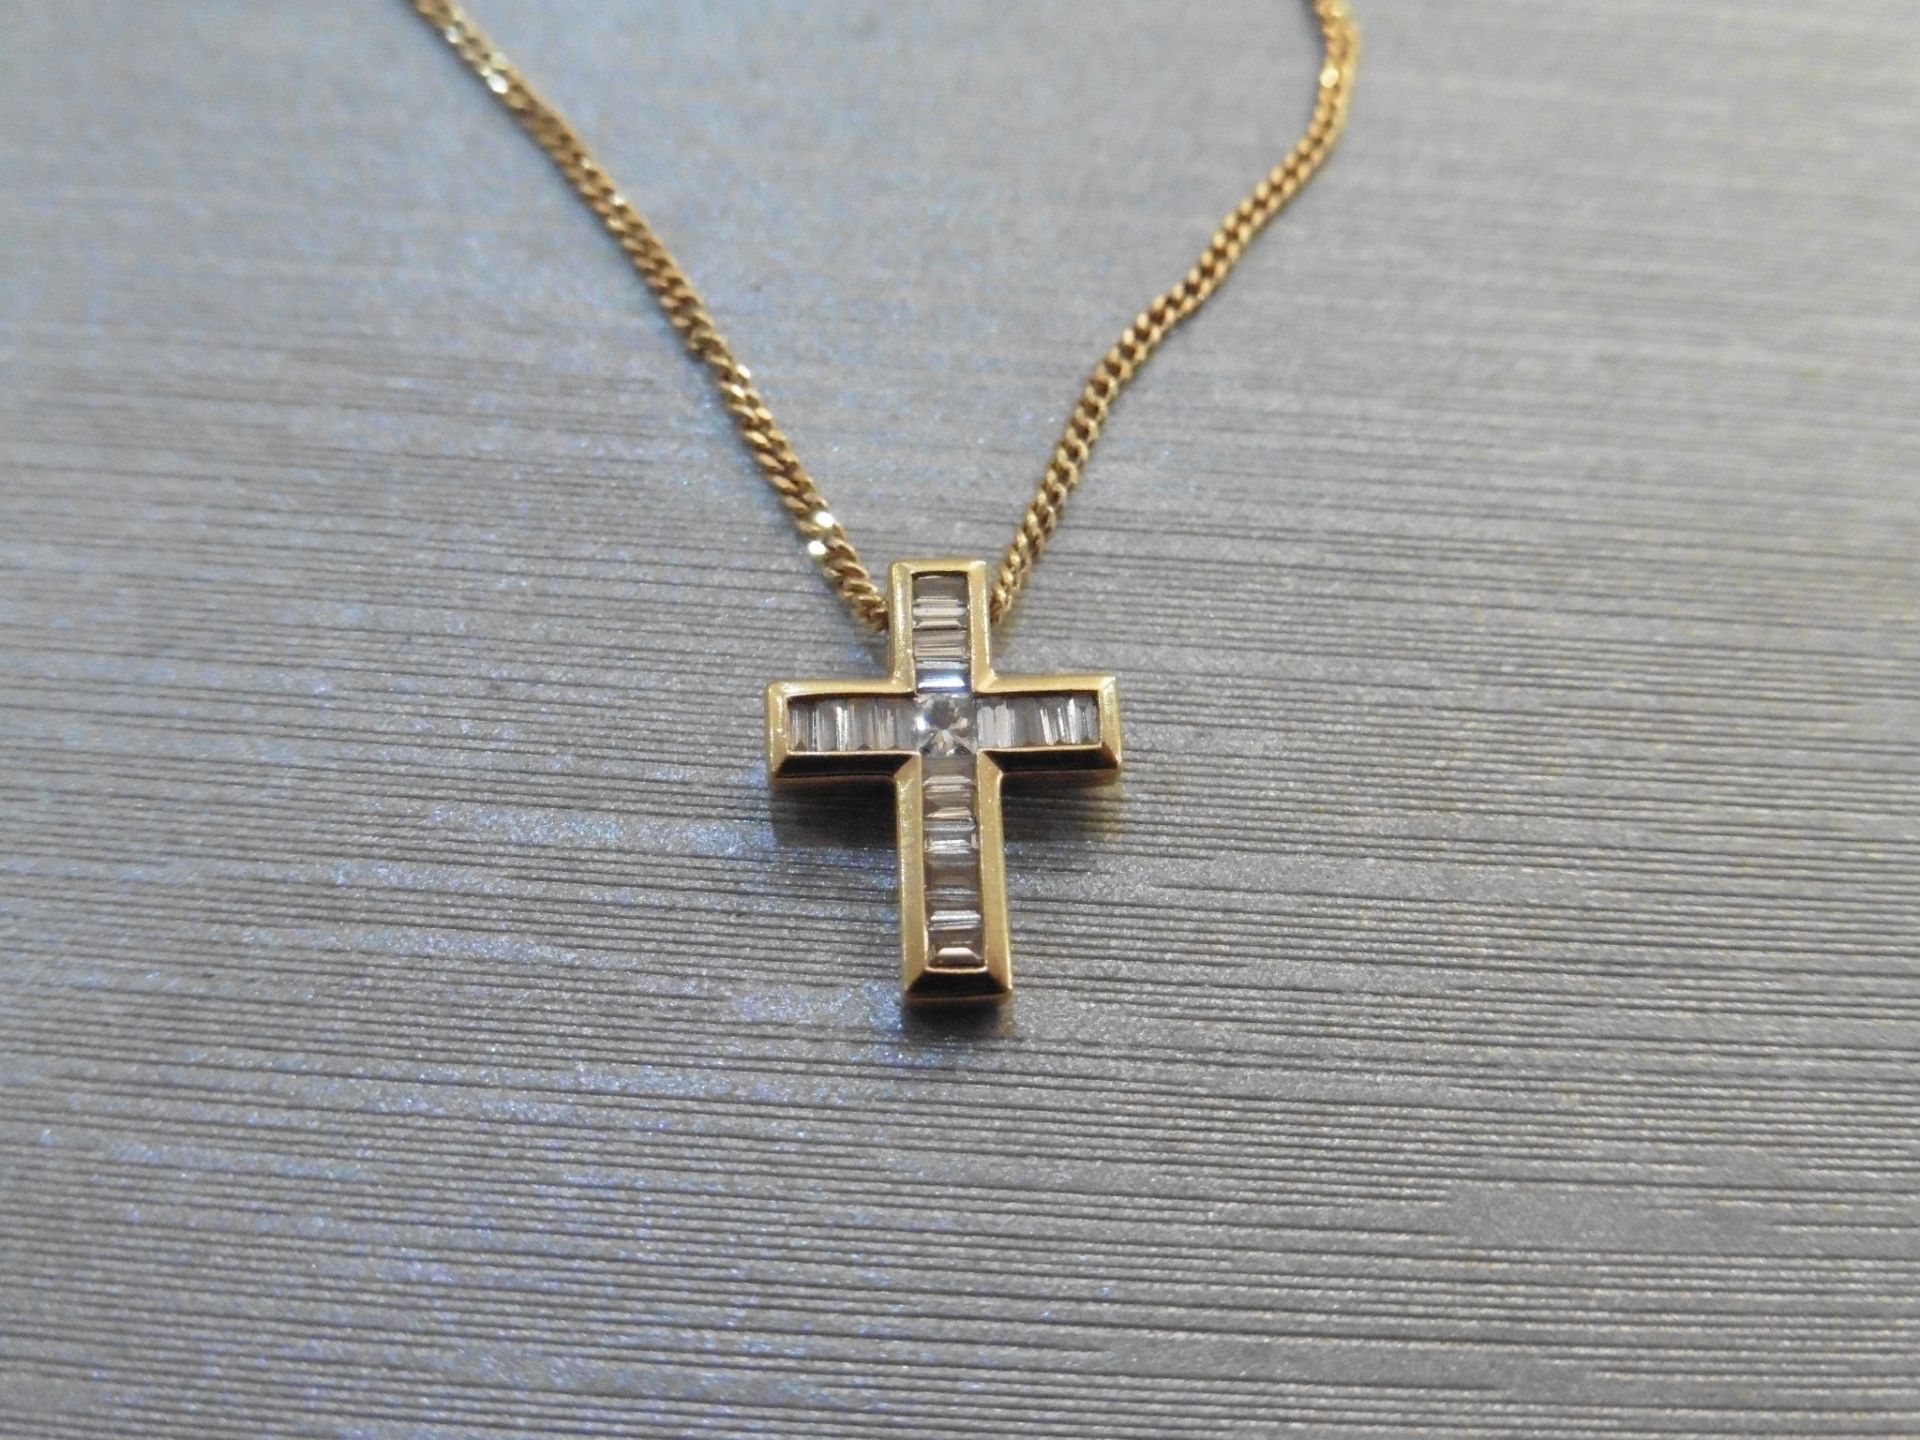 Diamond cross pendant set with 1 small princess cut diamond in the centre and surrounded by baguette